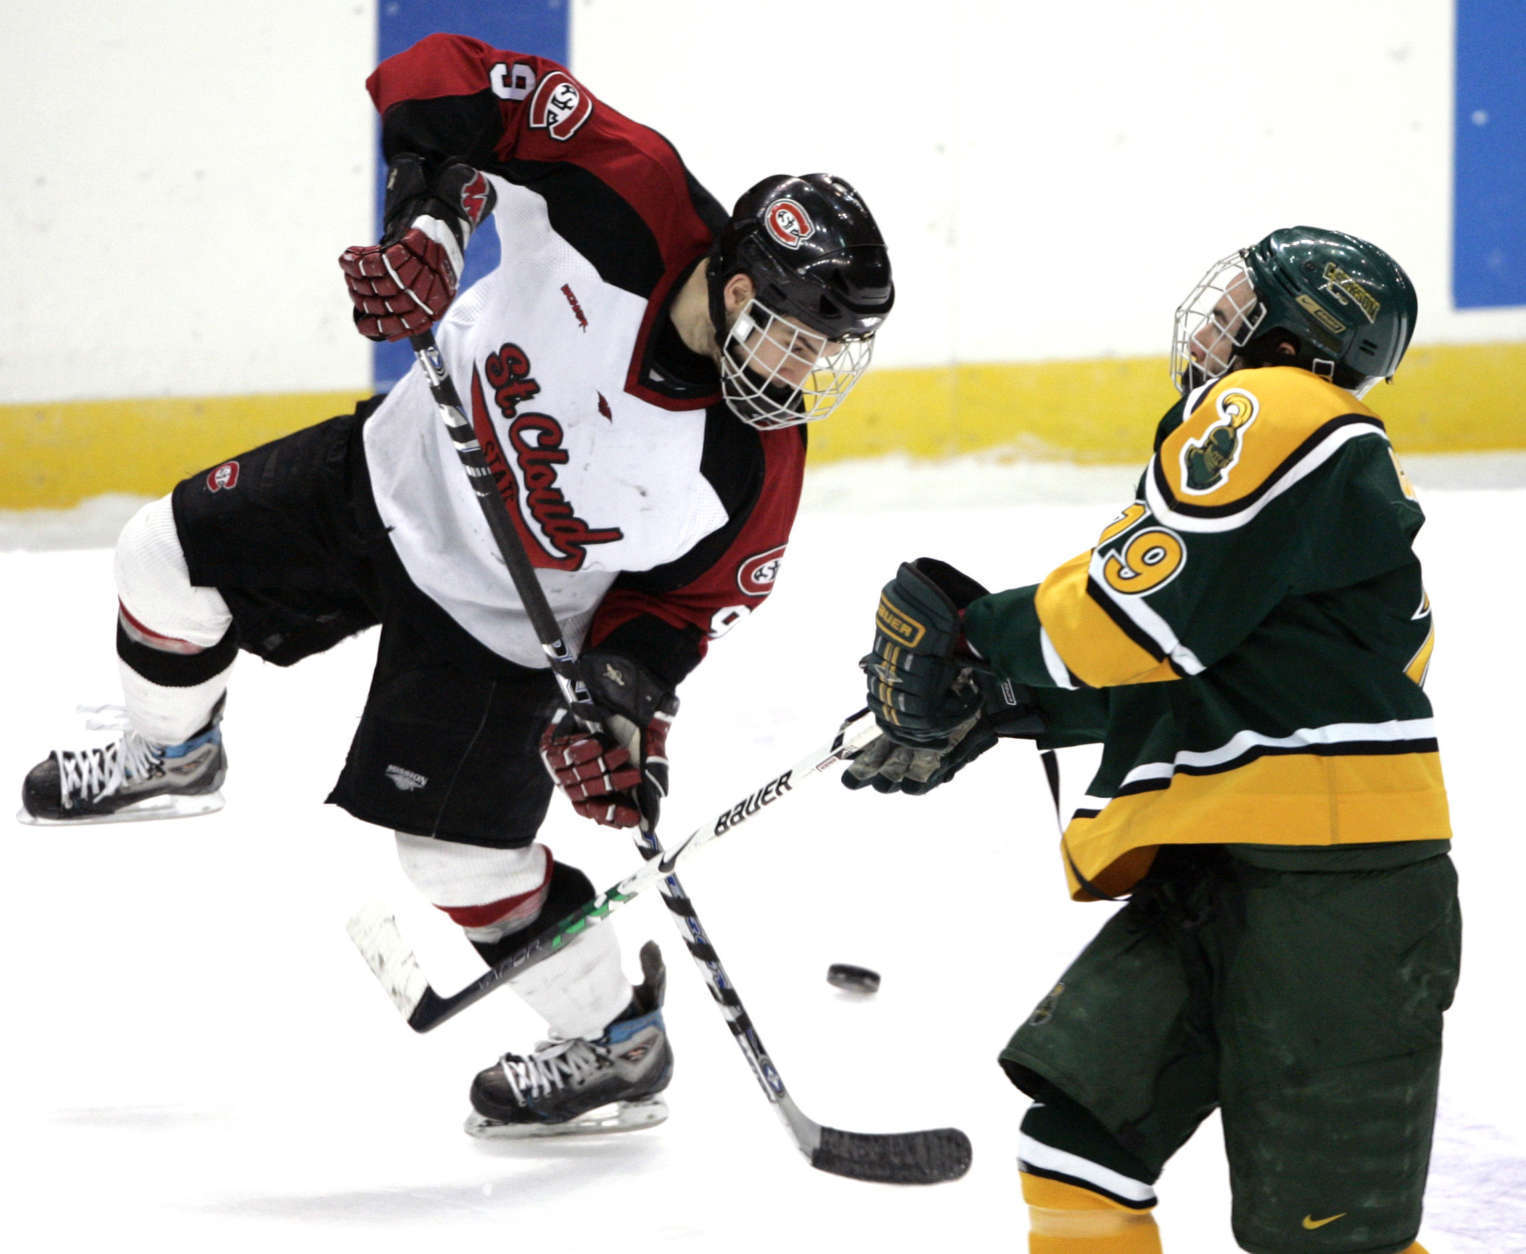 St. Cloud State center Garrett Roe (9) is checked by Clarkson winger David Cayer (19) during the second period of their NCAA East Regional semifinal hockey game in Albany, N.Y., Friday, March 28, 2008.  (AP Photo/Mike Groll)